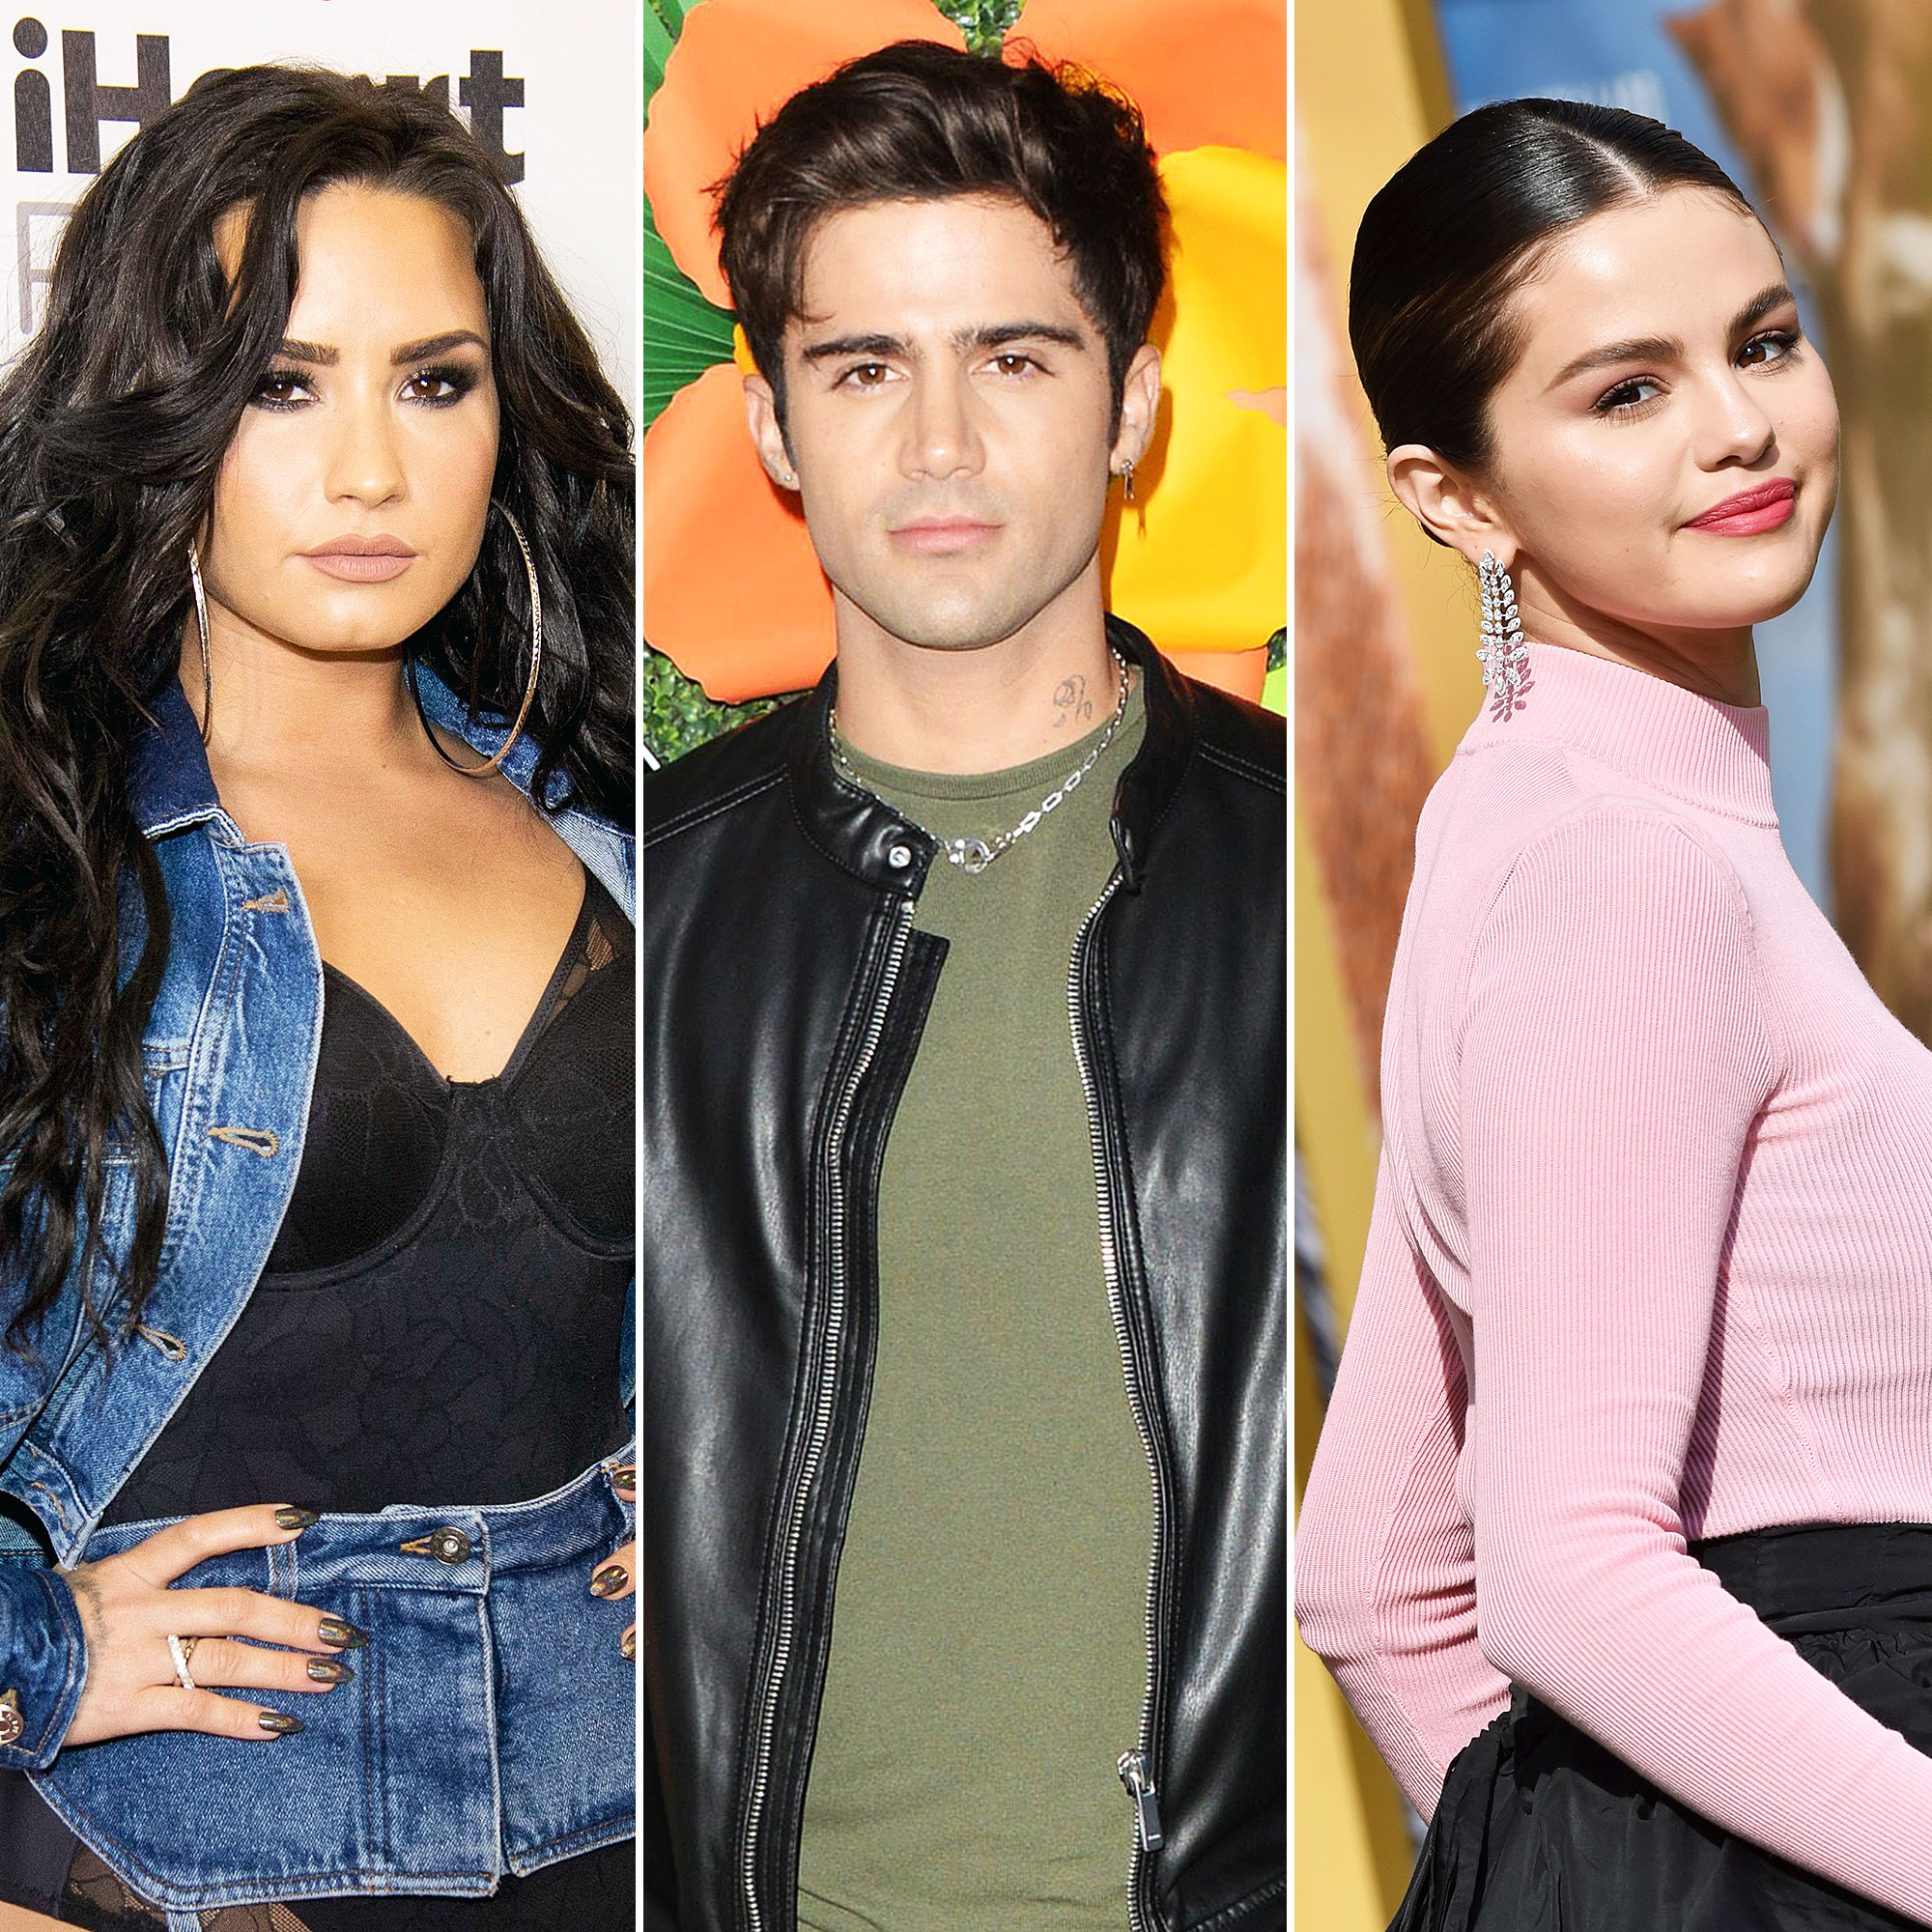 Real Celebrity Porn Selena Gomez - Demi Lovato on Fiance Max Ehrich's Alleged Tweets About Selena Gomez